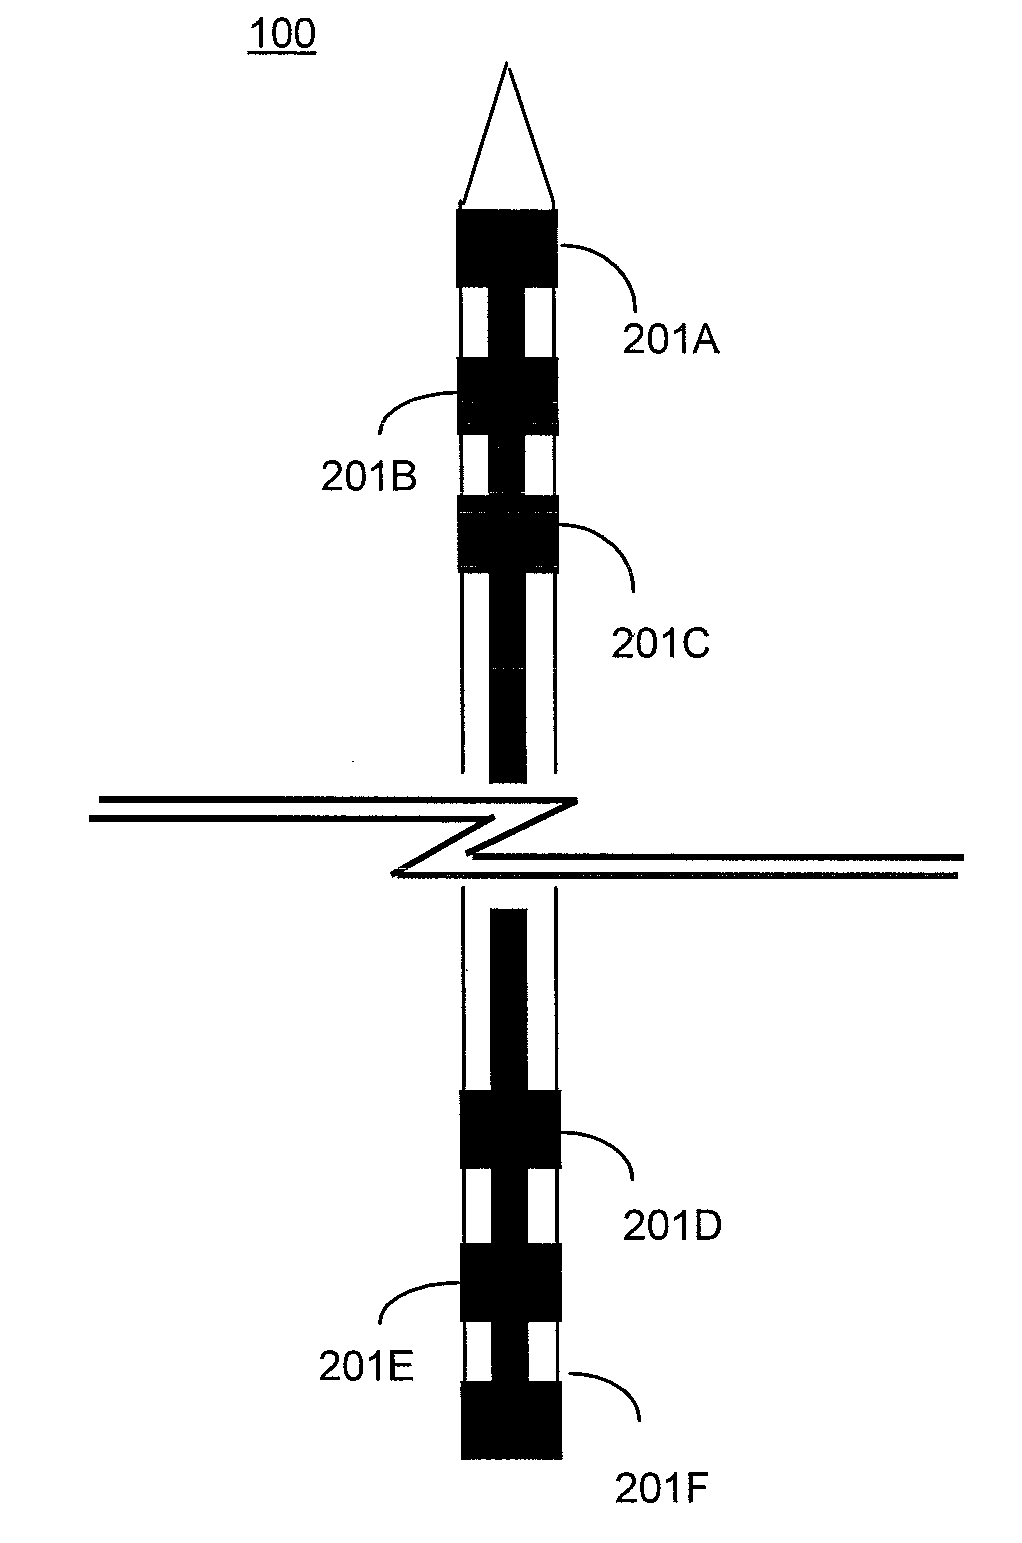 Malleable needle having a plurality of electrodes for facilitating implantation of stimulation lead and method of implanting an electrical stimulation lead